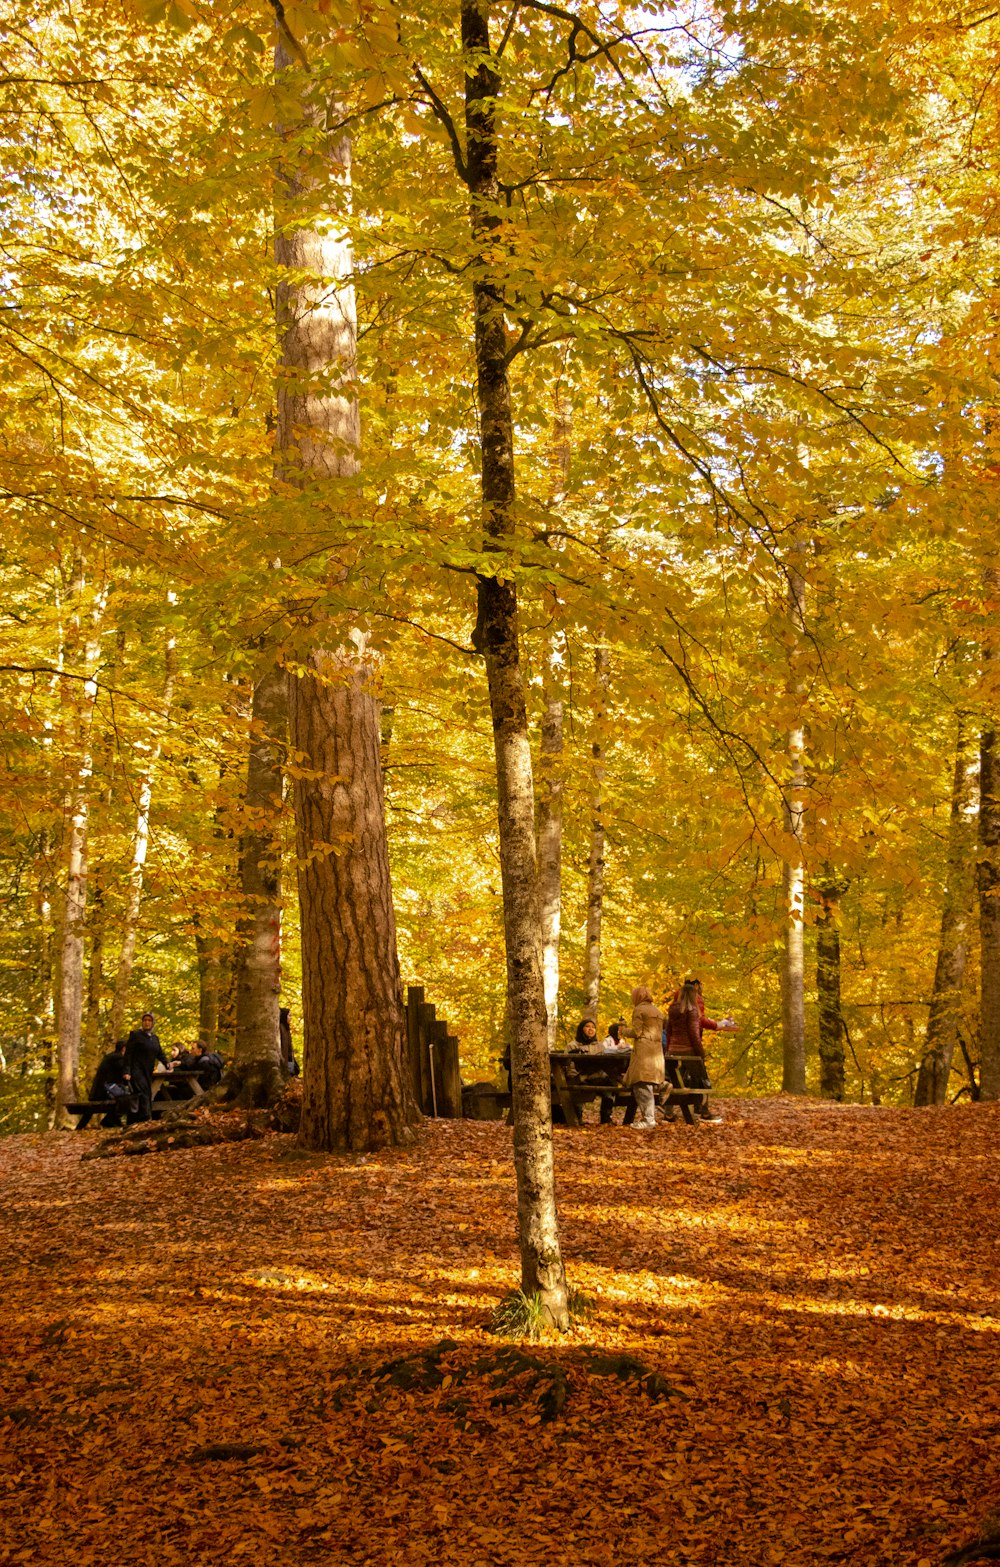 a group of people sitting on a bench in a forest